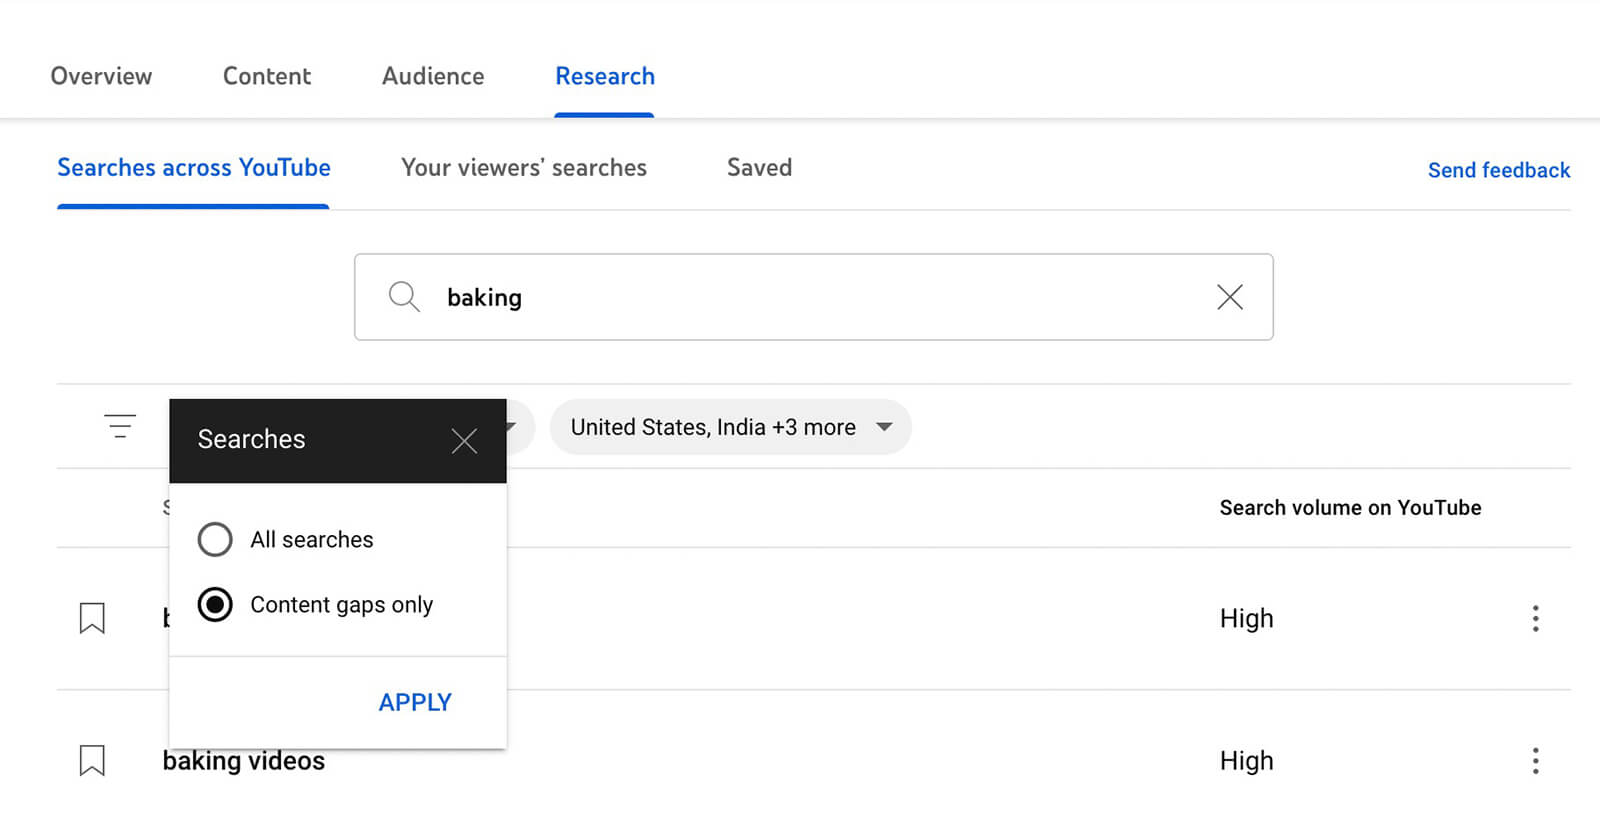 discover-youtube-content-gaps-for-search-terms-desktop-12